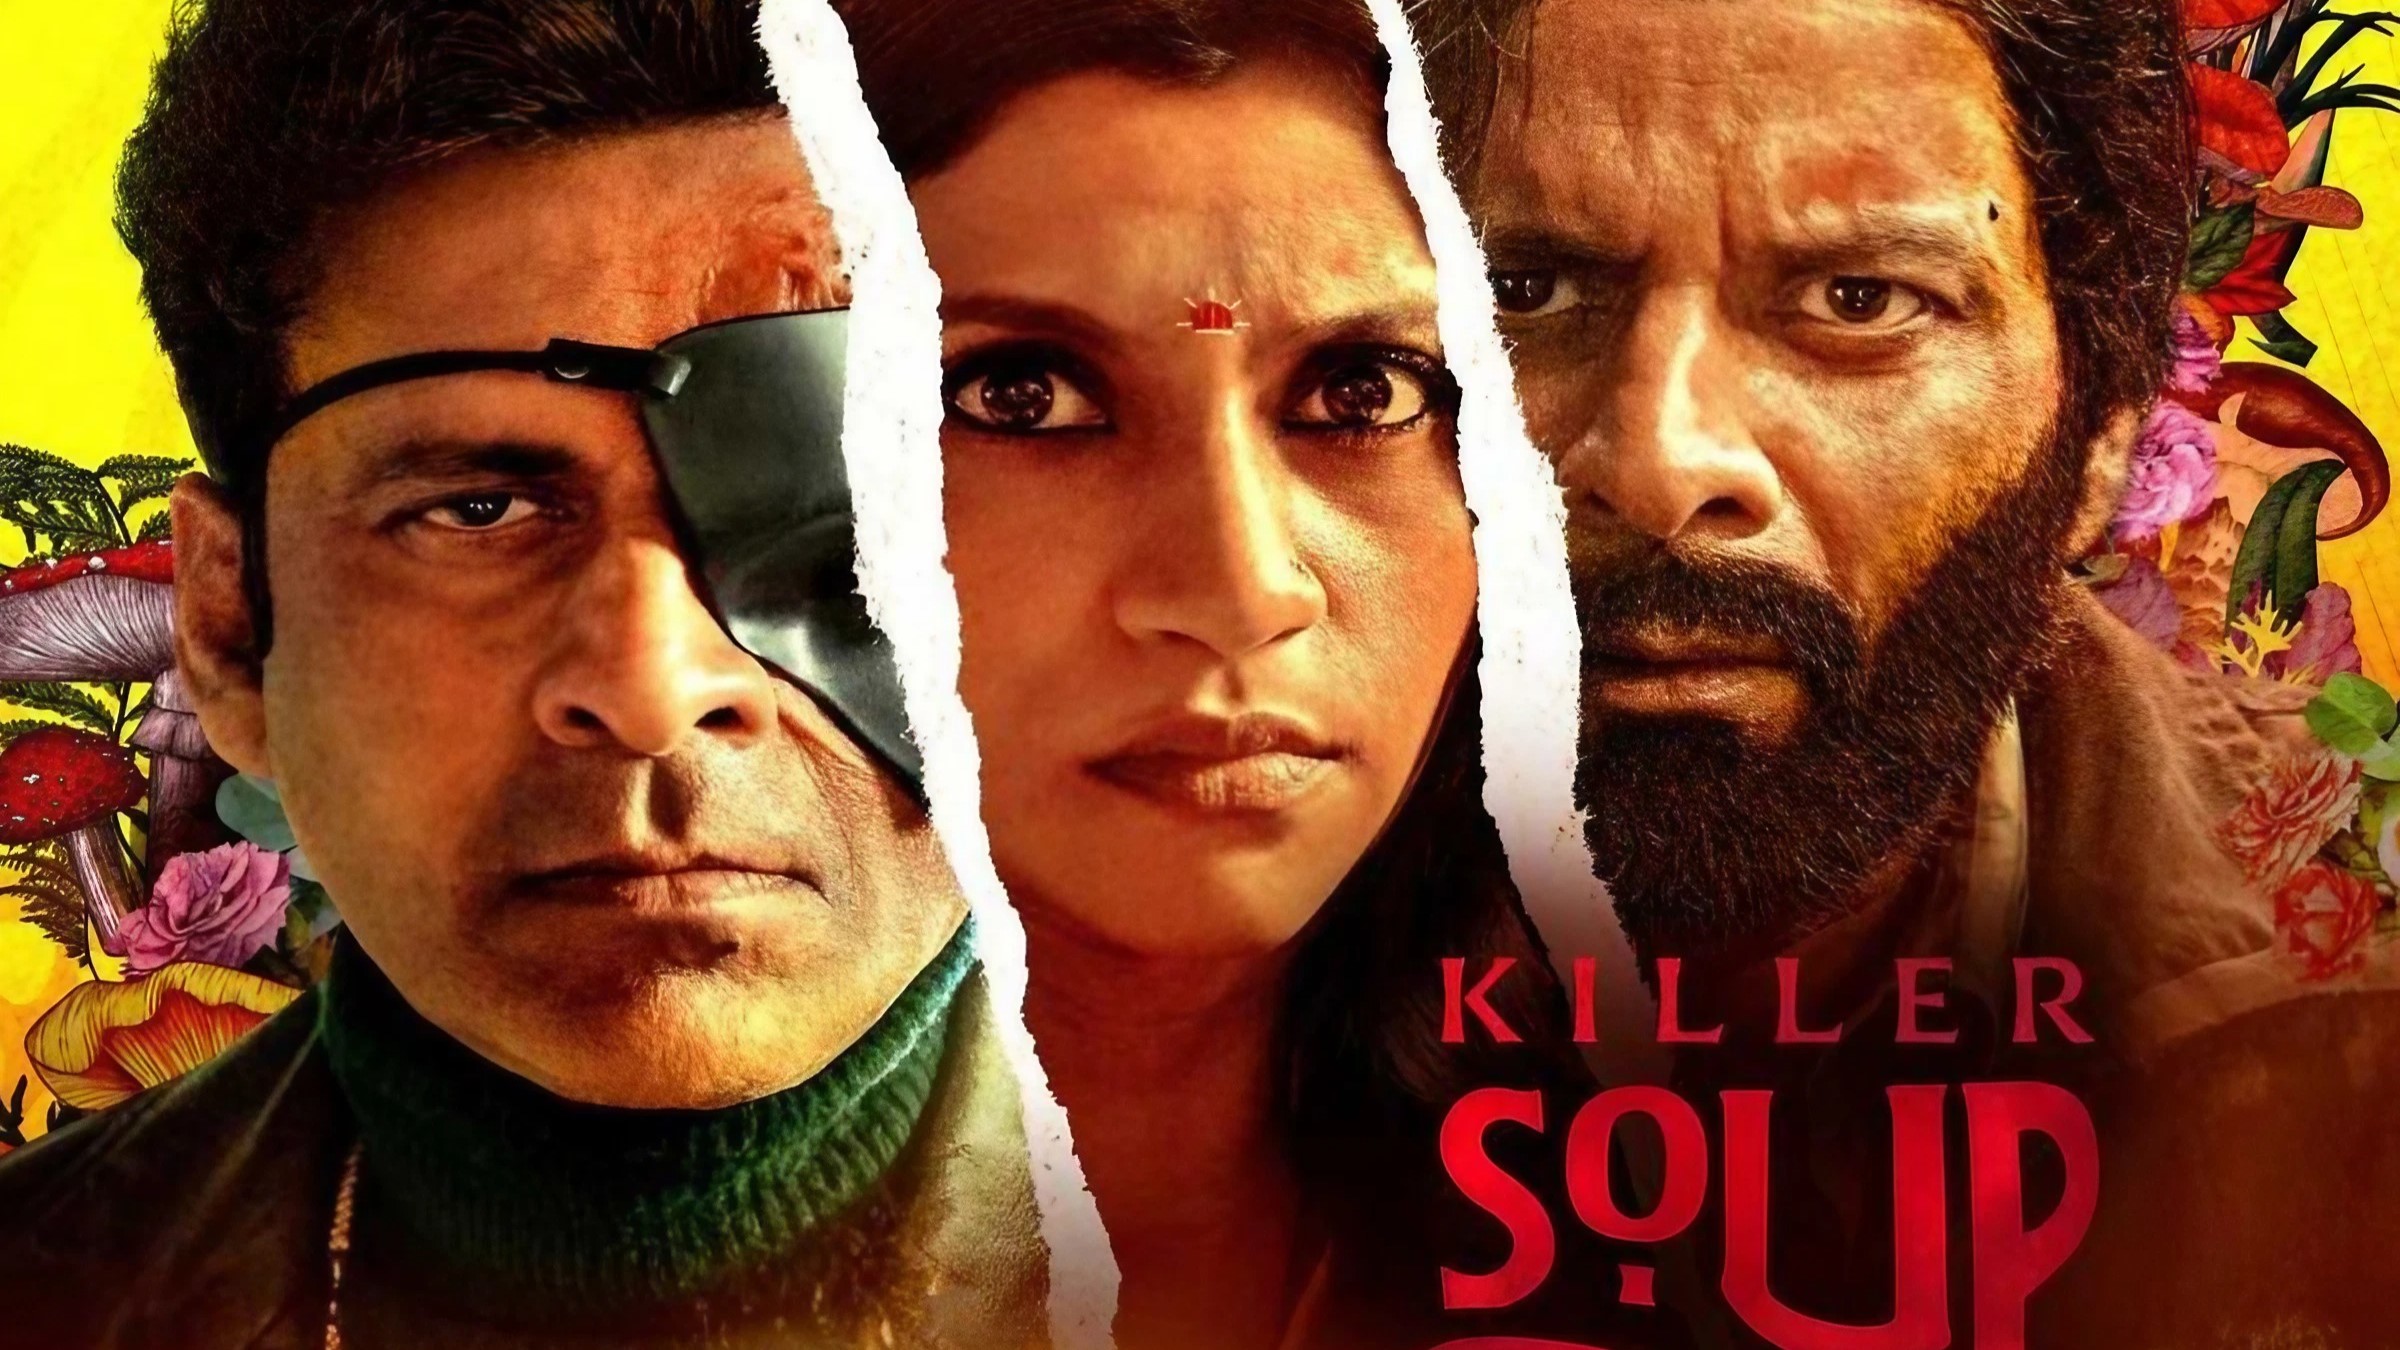 Killer Soup is based on real story